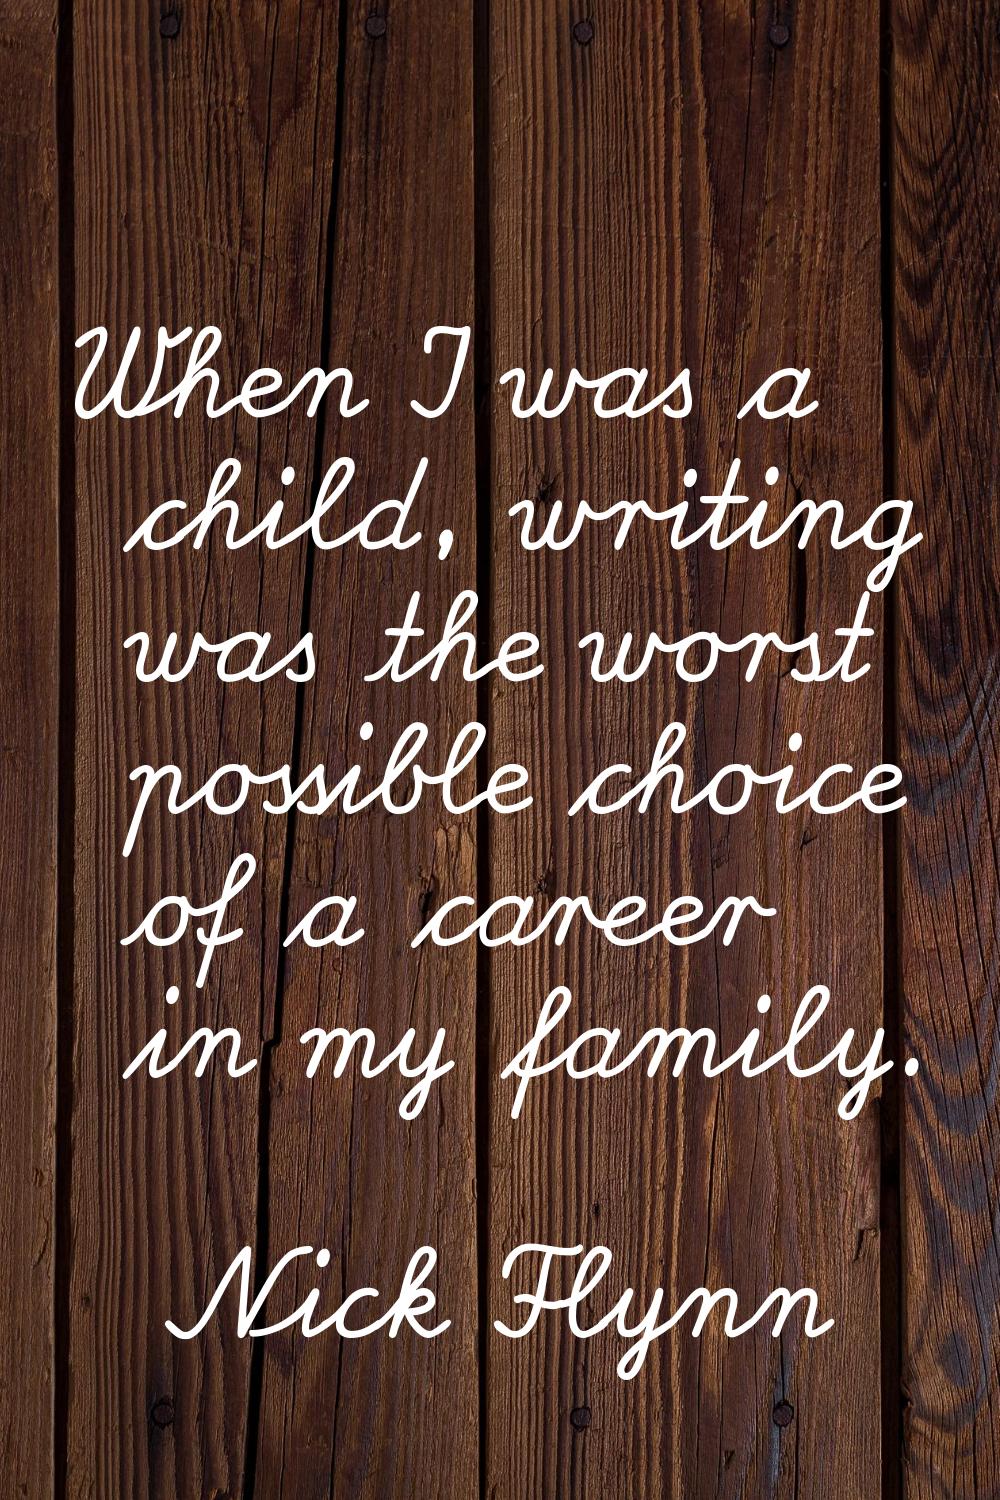 When I was a child, writing was the worst possible choice of a career in my family.